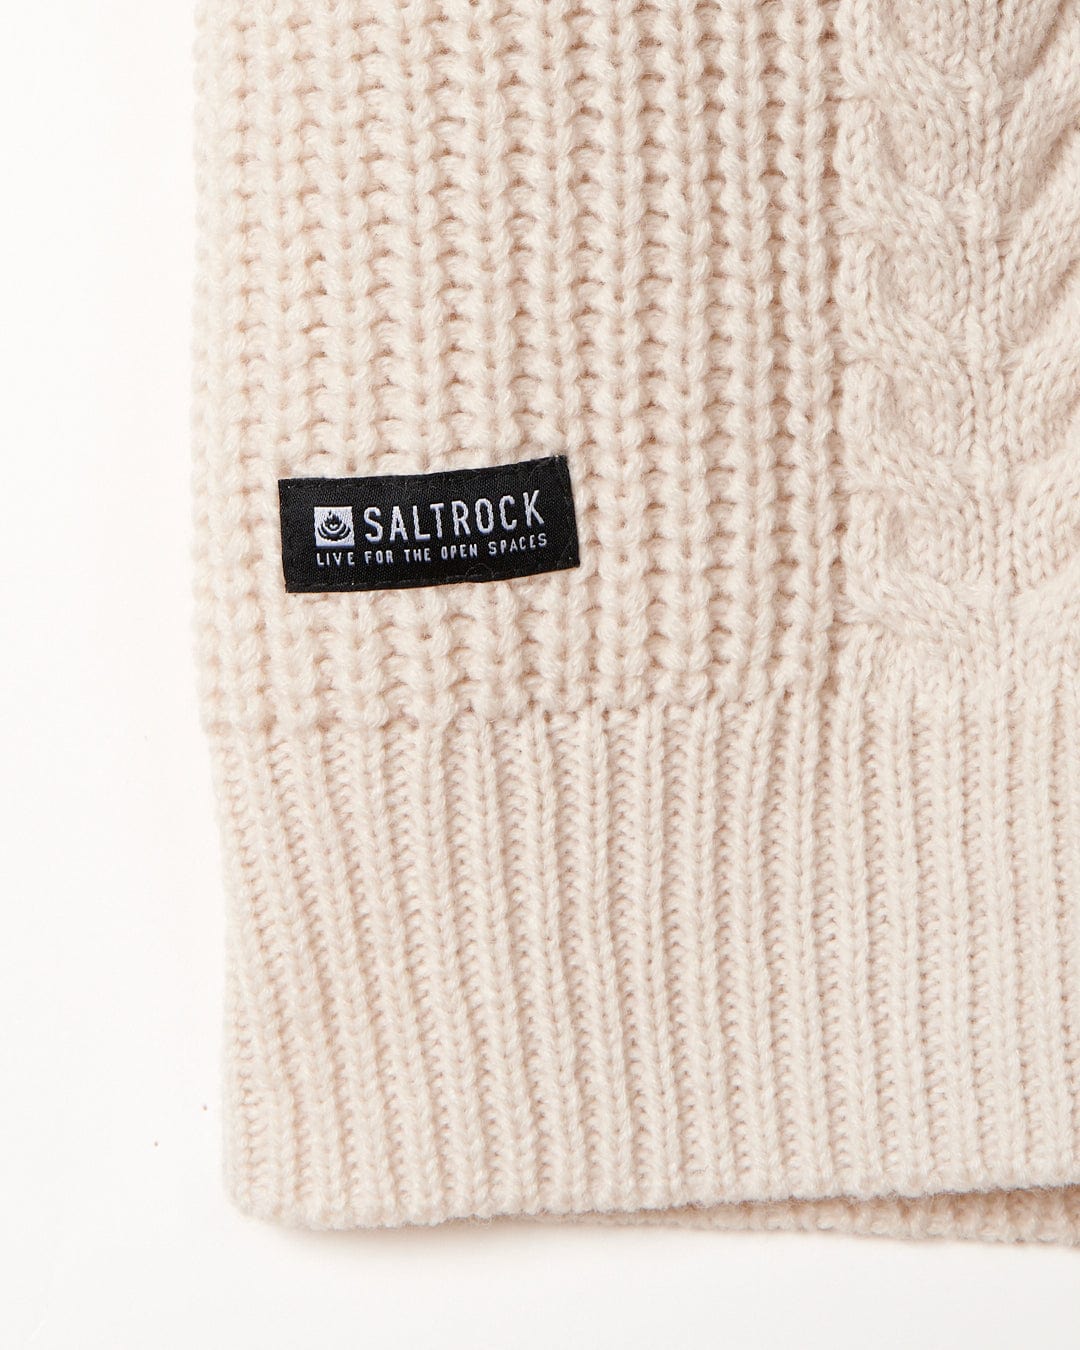 Close-up of a cream-colored cable knit fabric with a Saltrock Women's Knitted Longline Cardigan - Cream label.